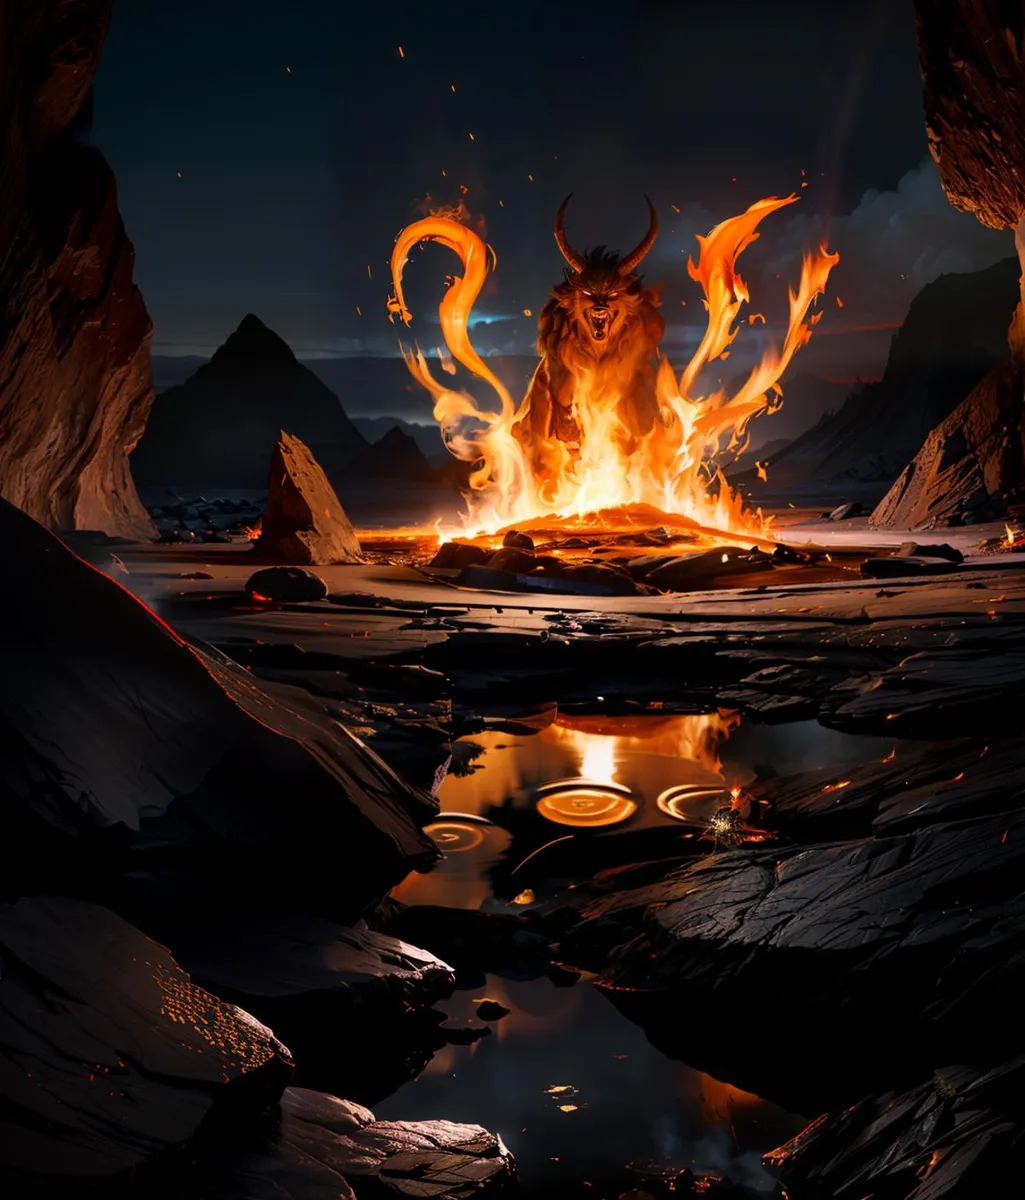 A demonic, fiery creature with horns emerging from a blazing fire in a dark, rocky, and hellish landscape. AI generated image using Stable Diffusion.